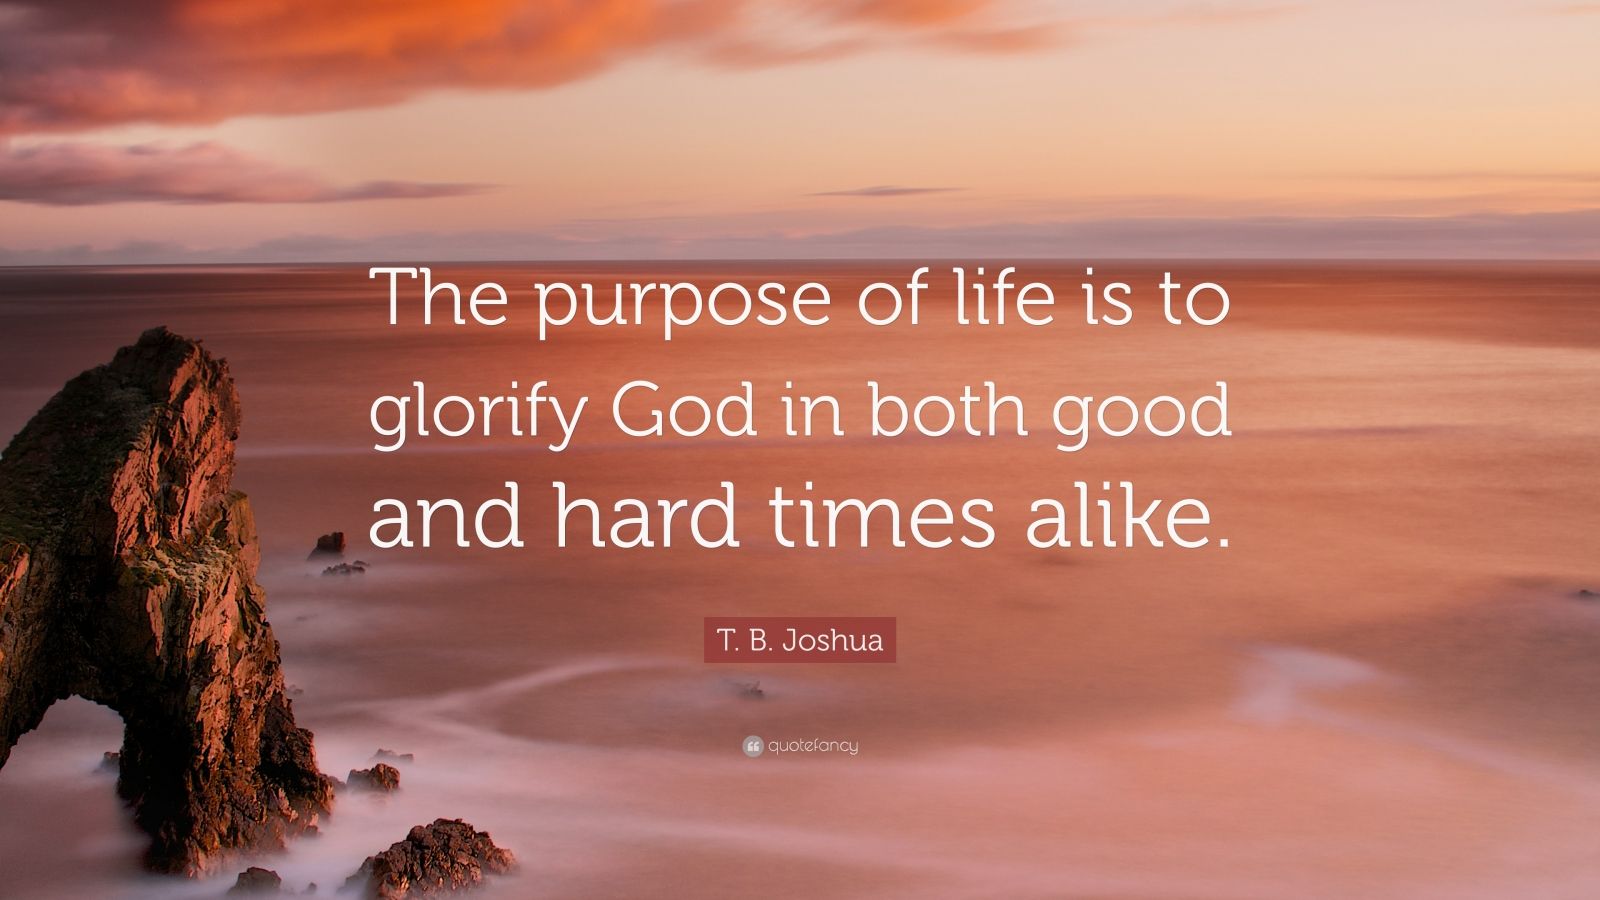 T. B. Joshua Quote: “The purpose of life is to glorify God in both good